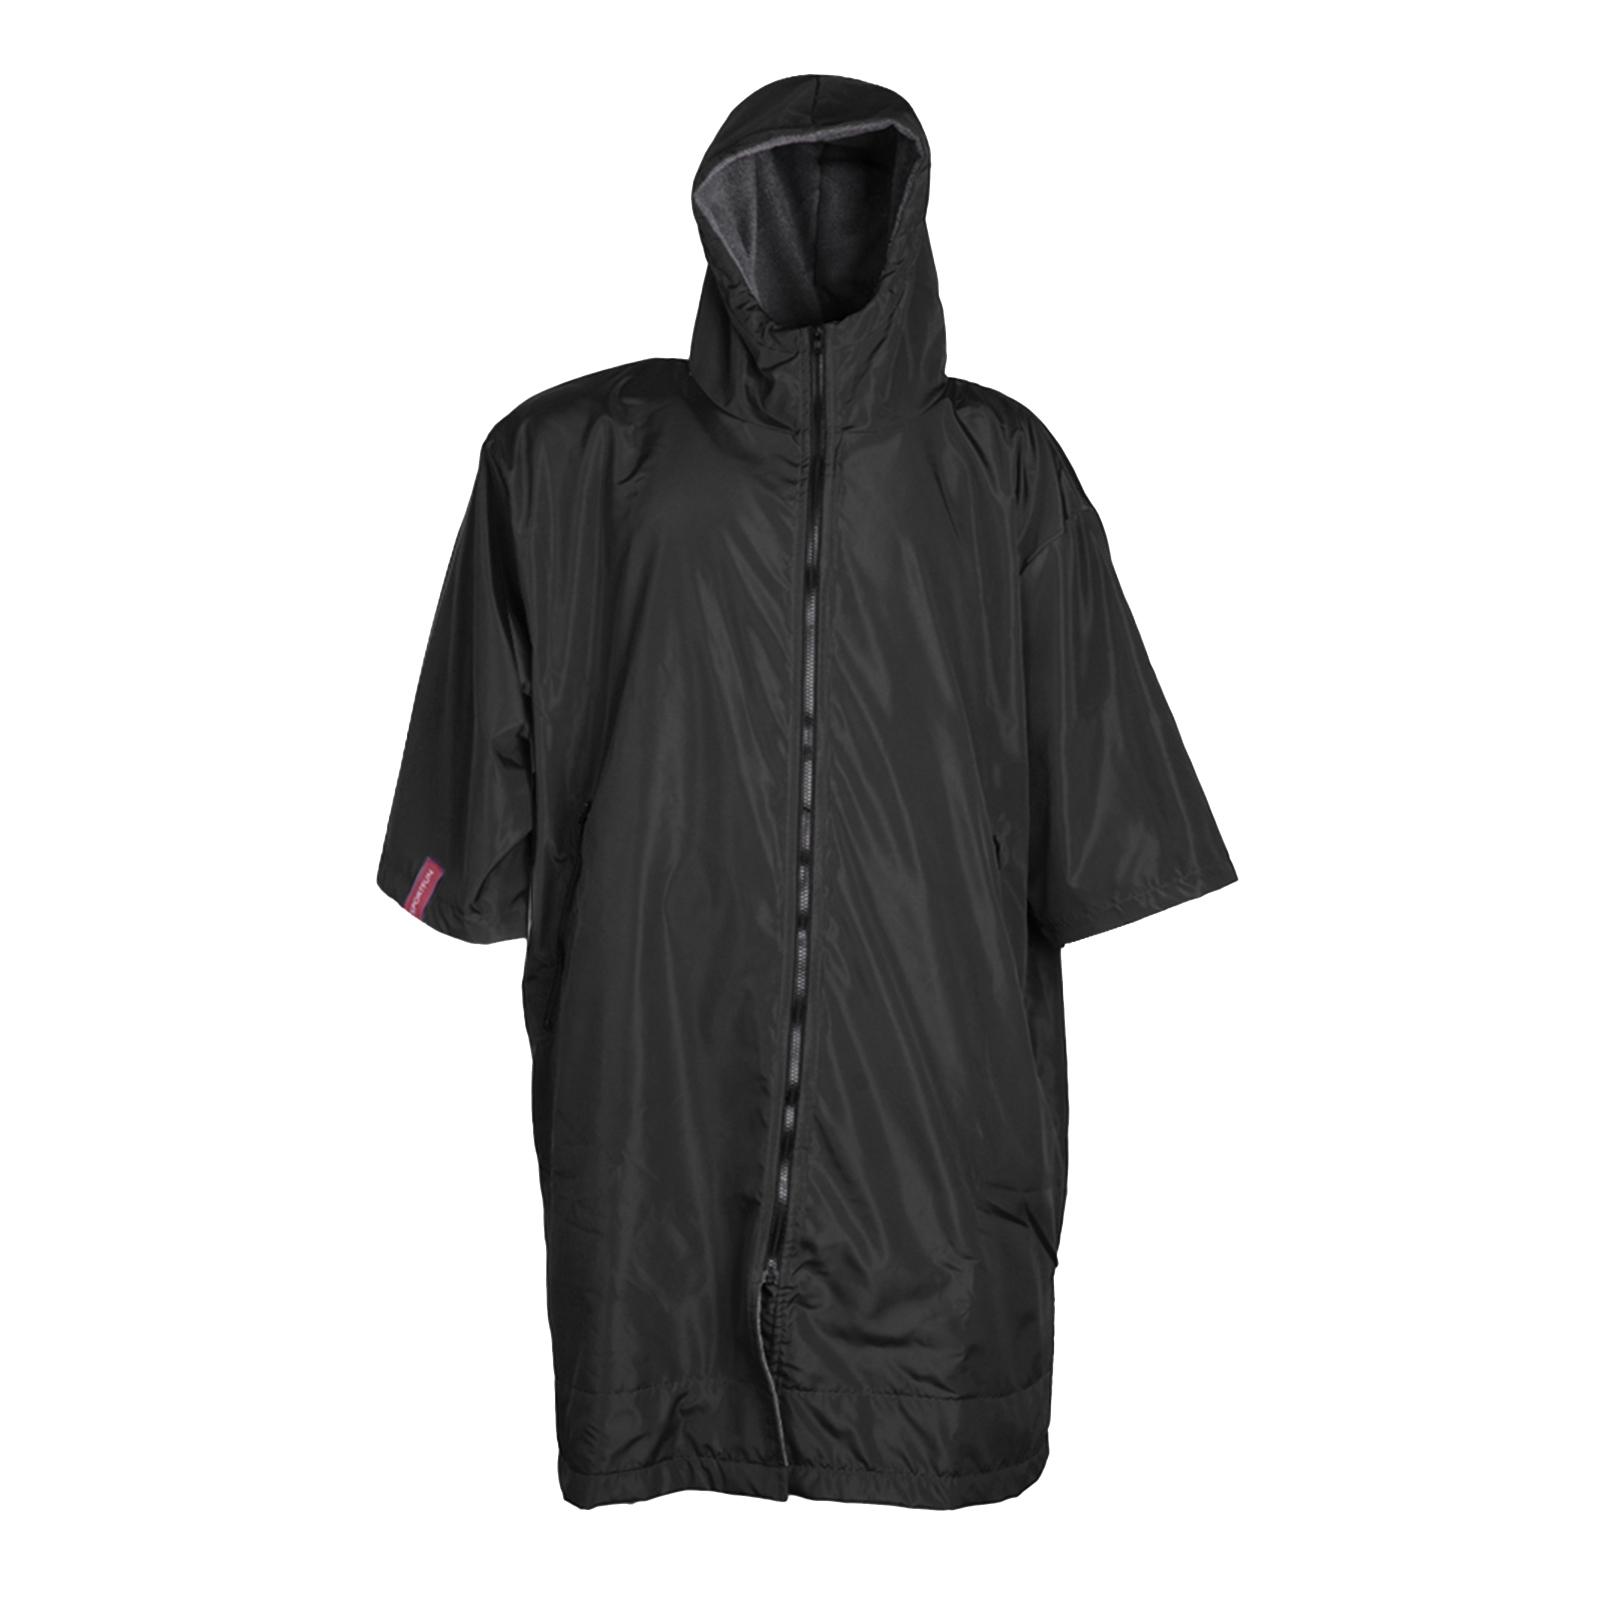 Thermal ed Windbreaker Long Fleece Lining Jacket Anorak Rain Coat Outdoor Water Sports Beach Swimming Changing Robe Poncho with , Inner Pocket - Black - image 1 of 9